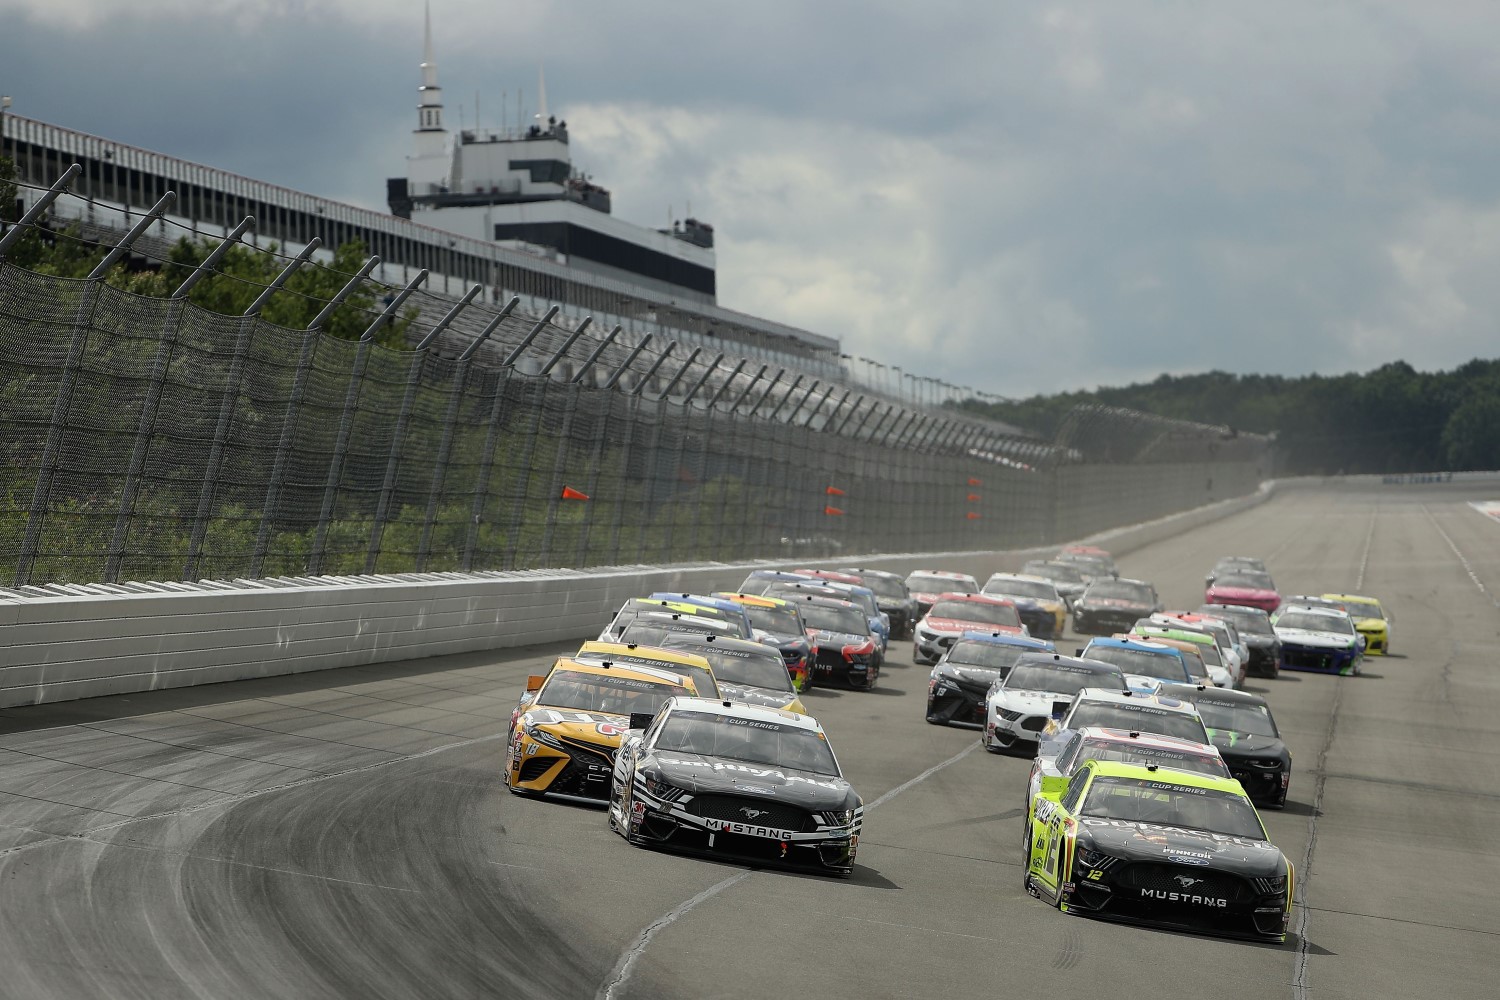 Free NASCAR Cup Series Race Included With NASCAR Xfinity Series Race Ticket at Pocono In 2021